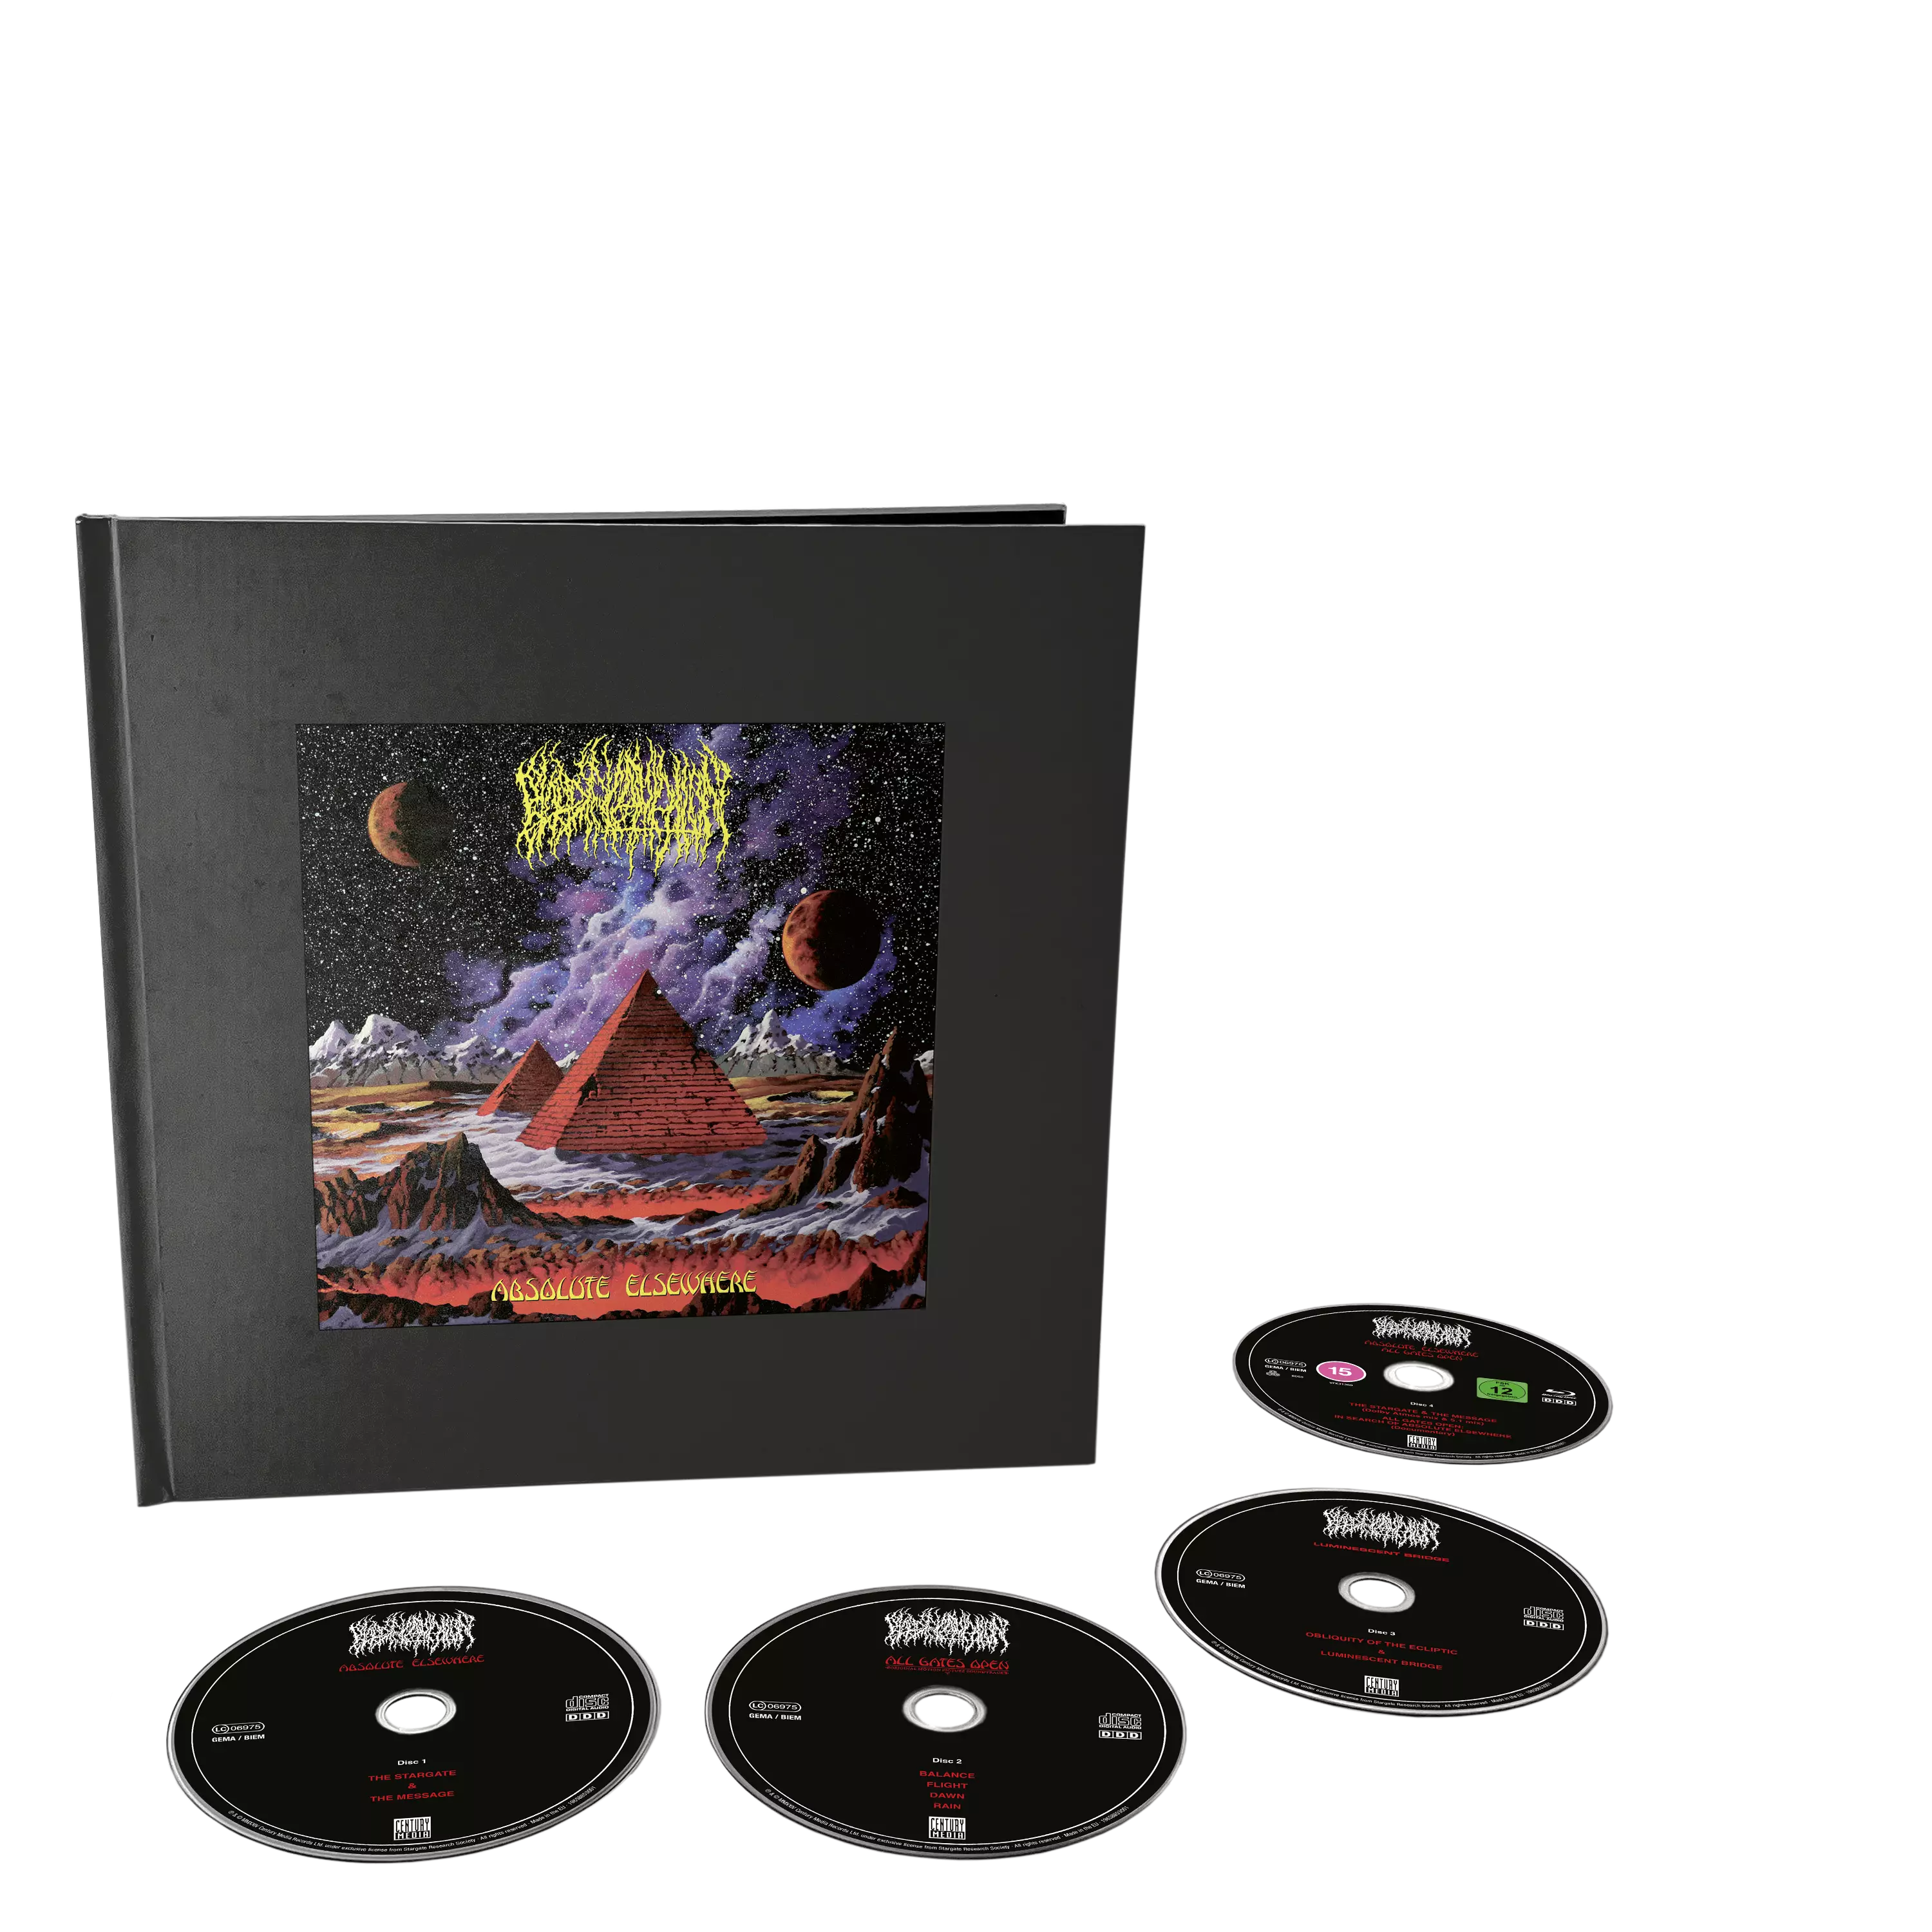 BLOOD INCANTATION - Absolute Elsewhere [LIMITED DELUXE 3CD + BLU-RAY ARTBOOK]